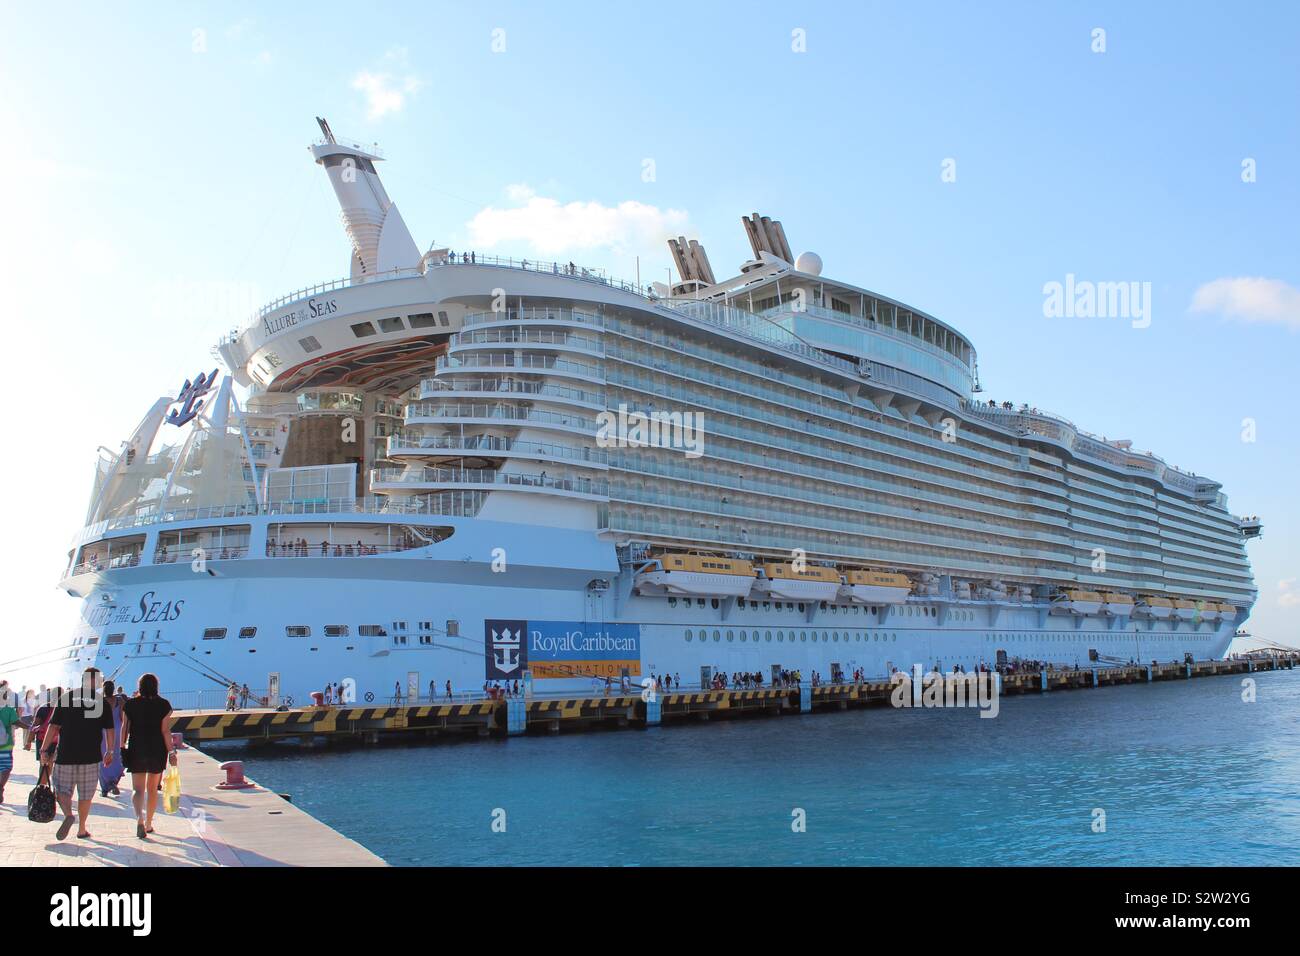 Royal Caribbean Allure of the Seas, docked in Cozumel, Mexico Stock Photo